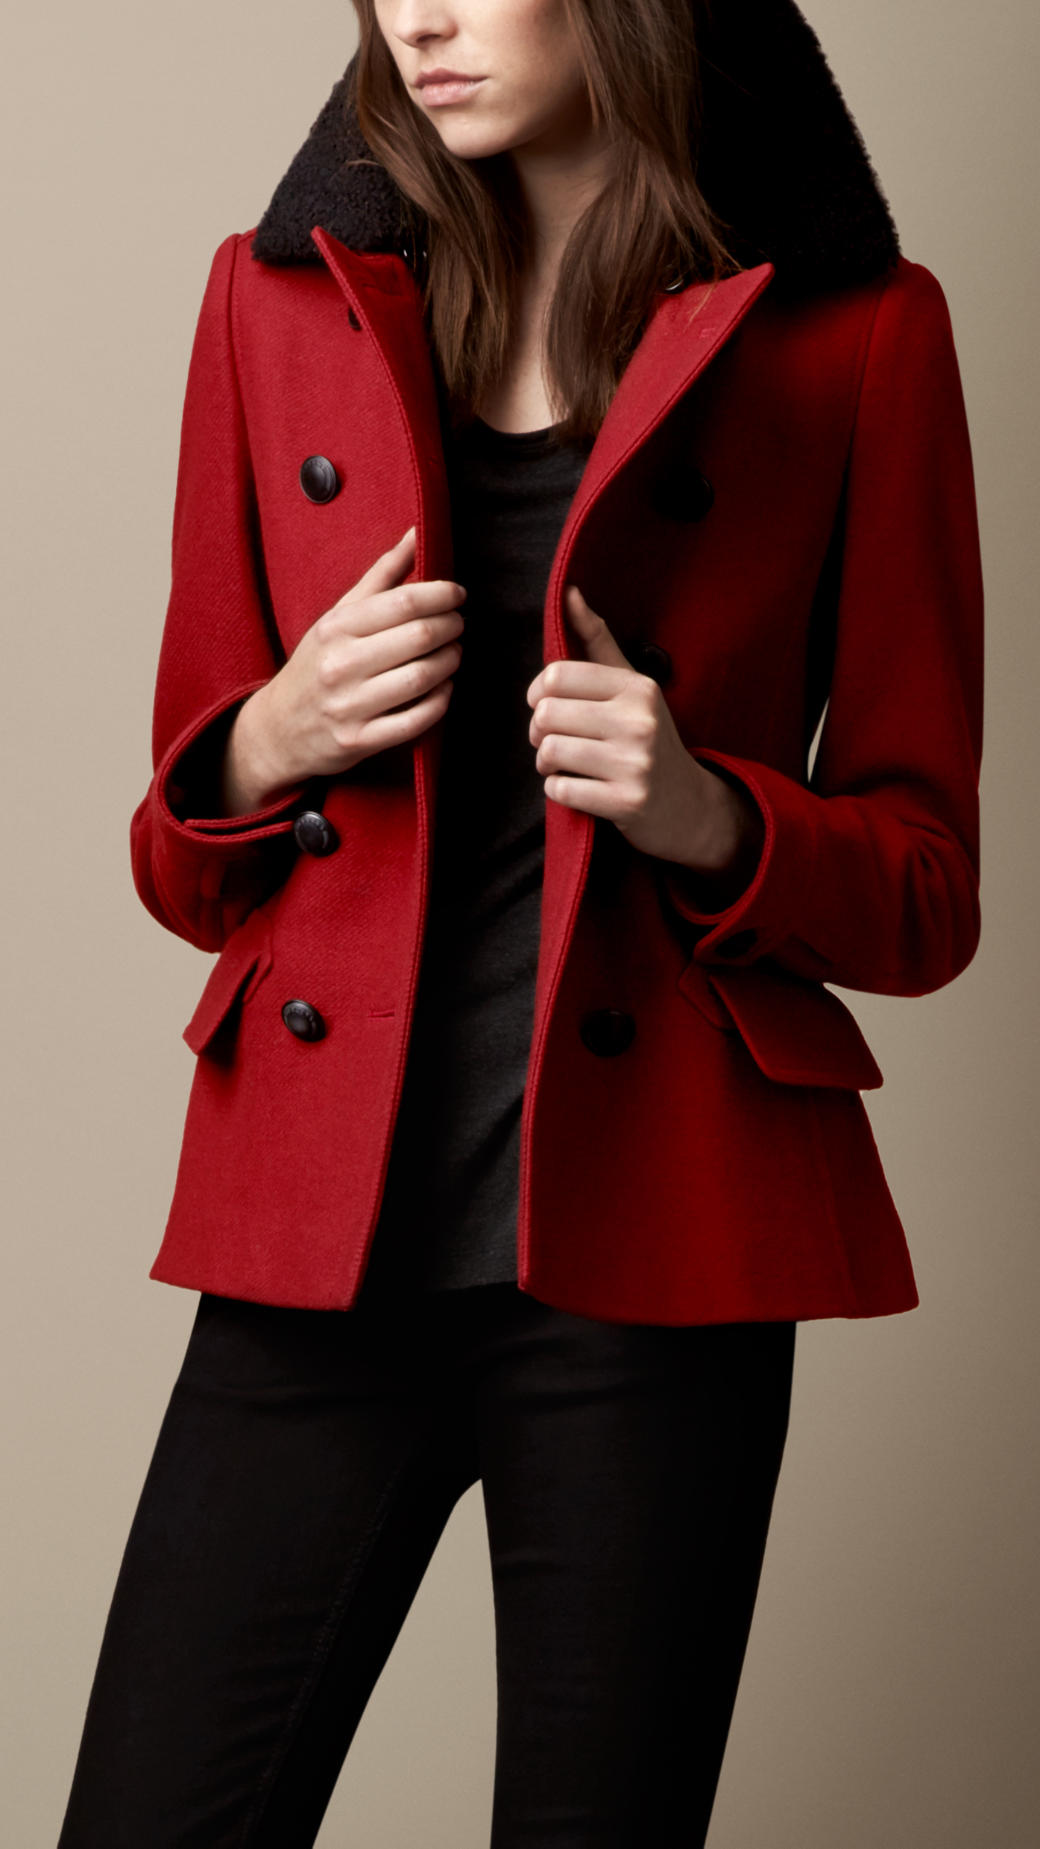 Shearling Collar Pea Coat in Damson Red (Red) - Lyst